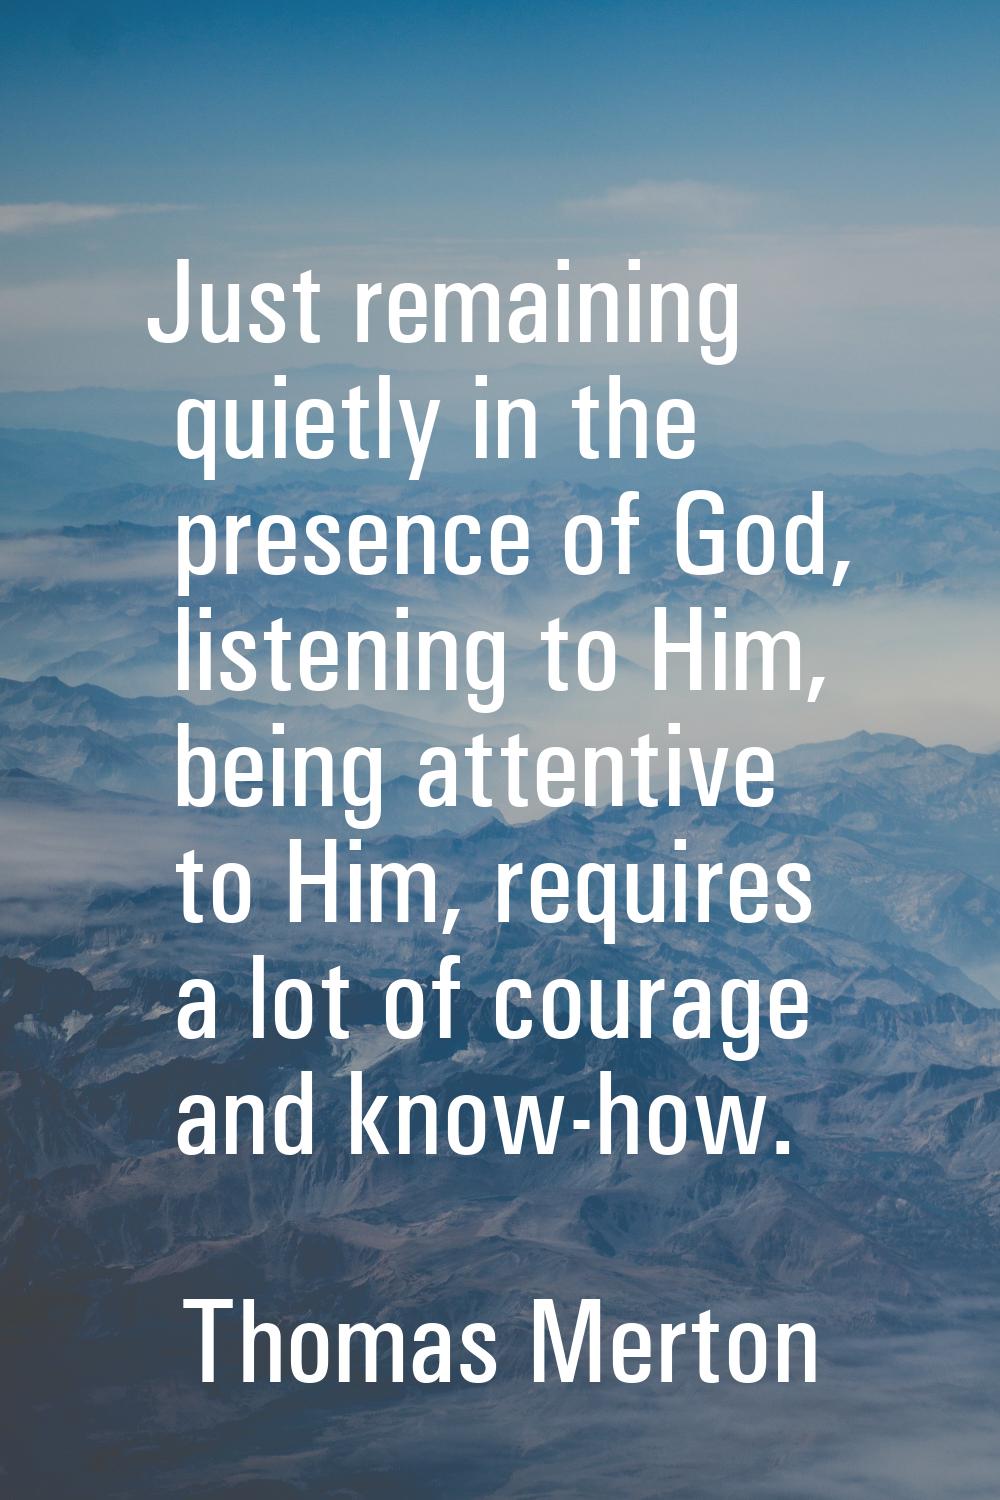 Just remaining quietly in the presence of God, listening to Him, being attentive to Him, requires a